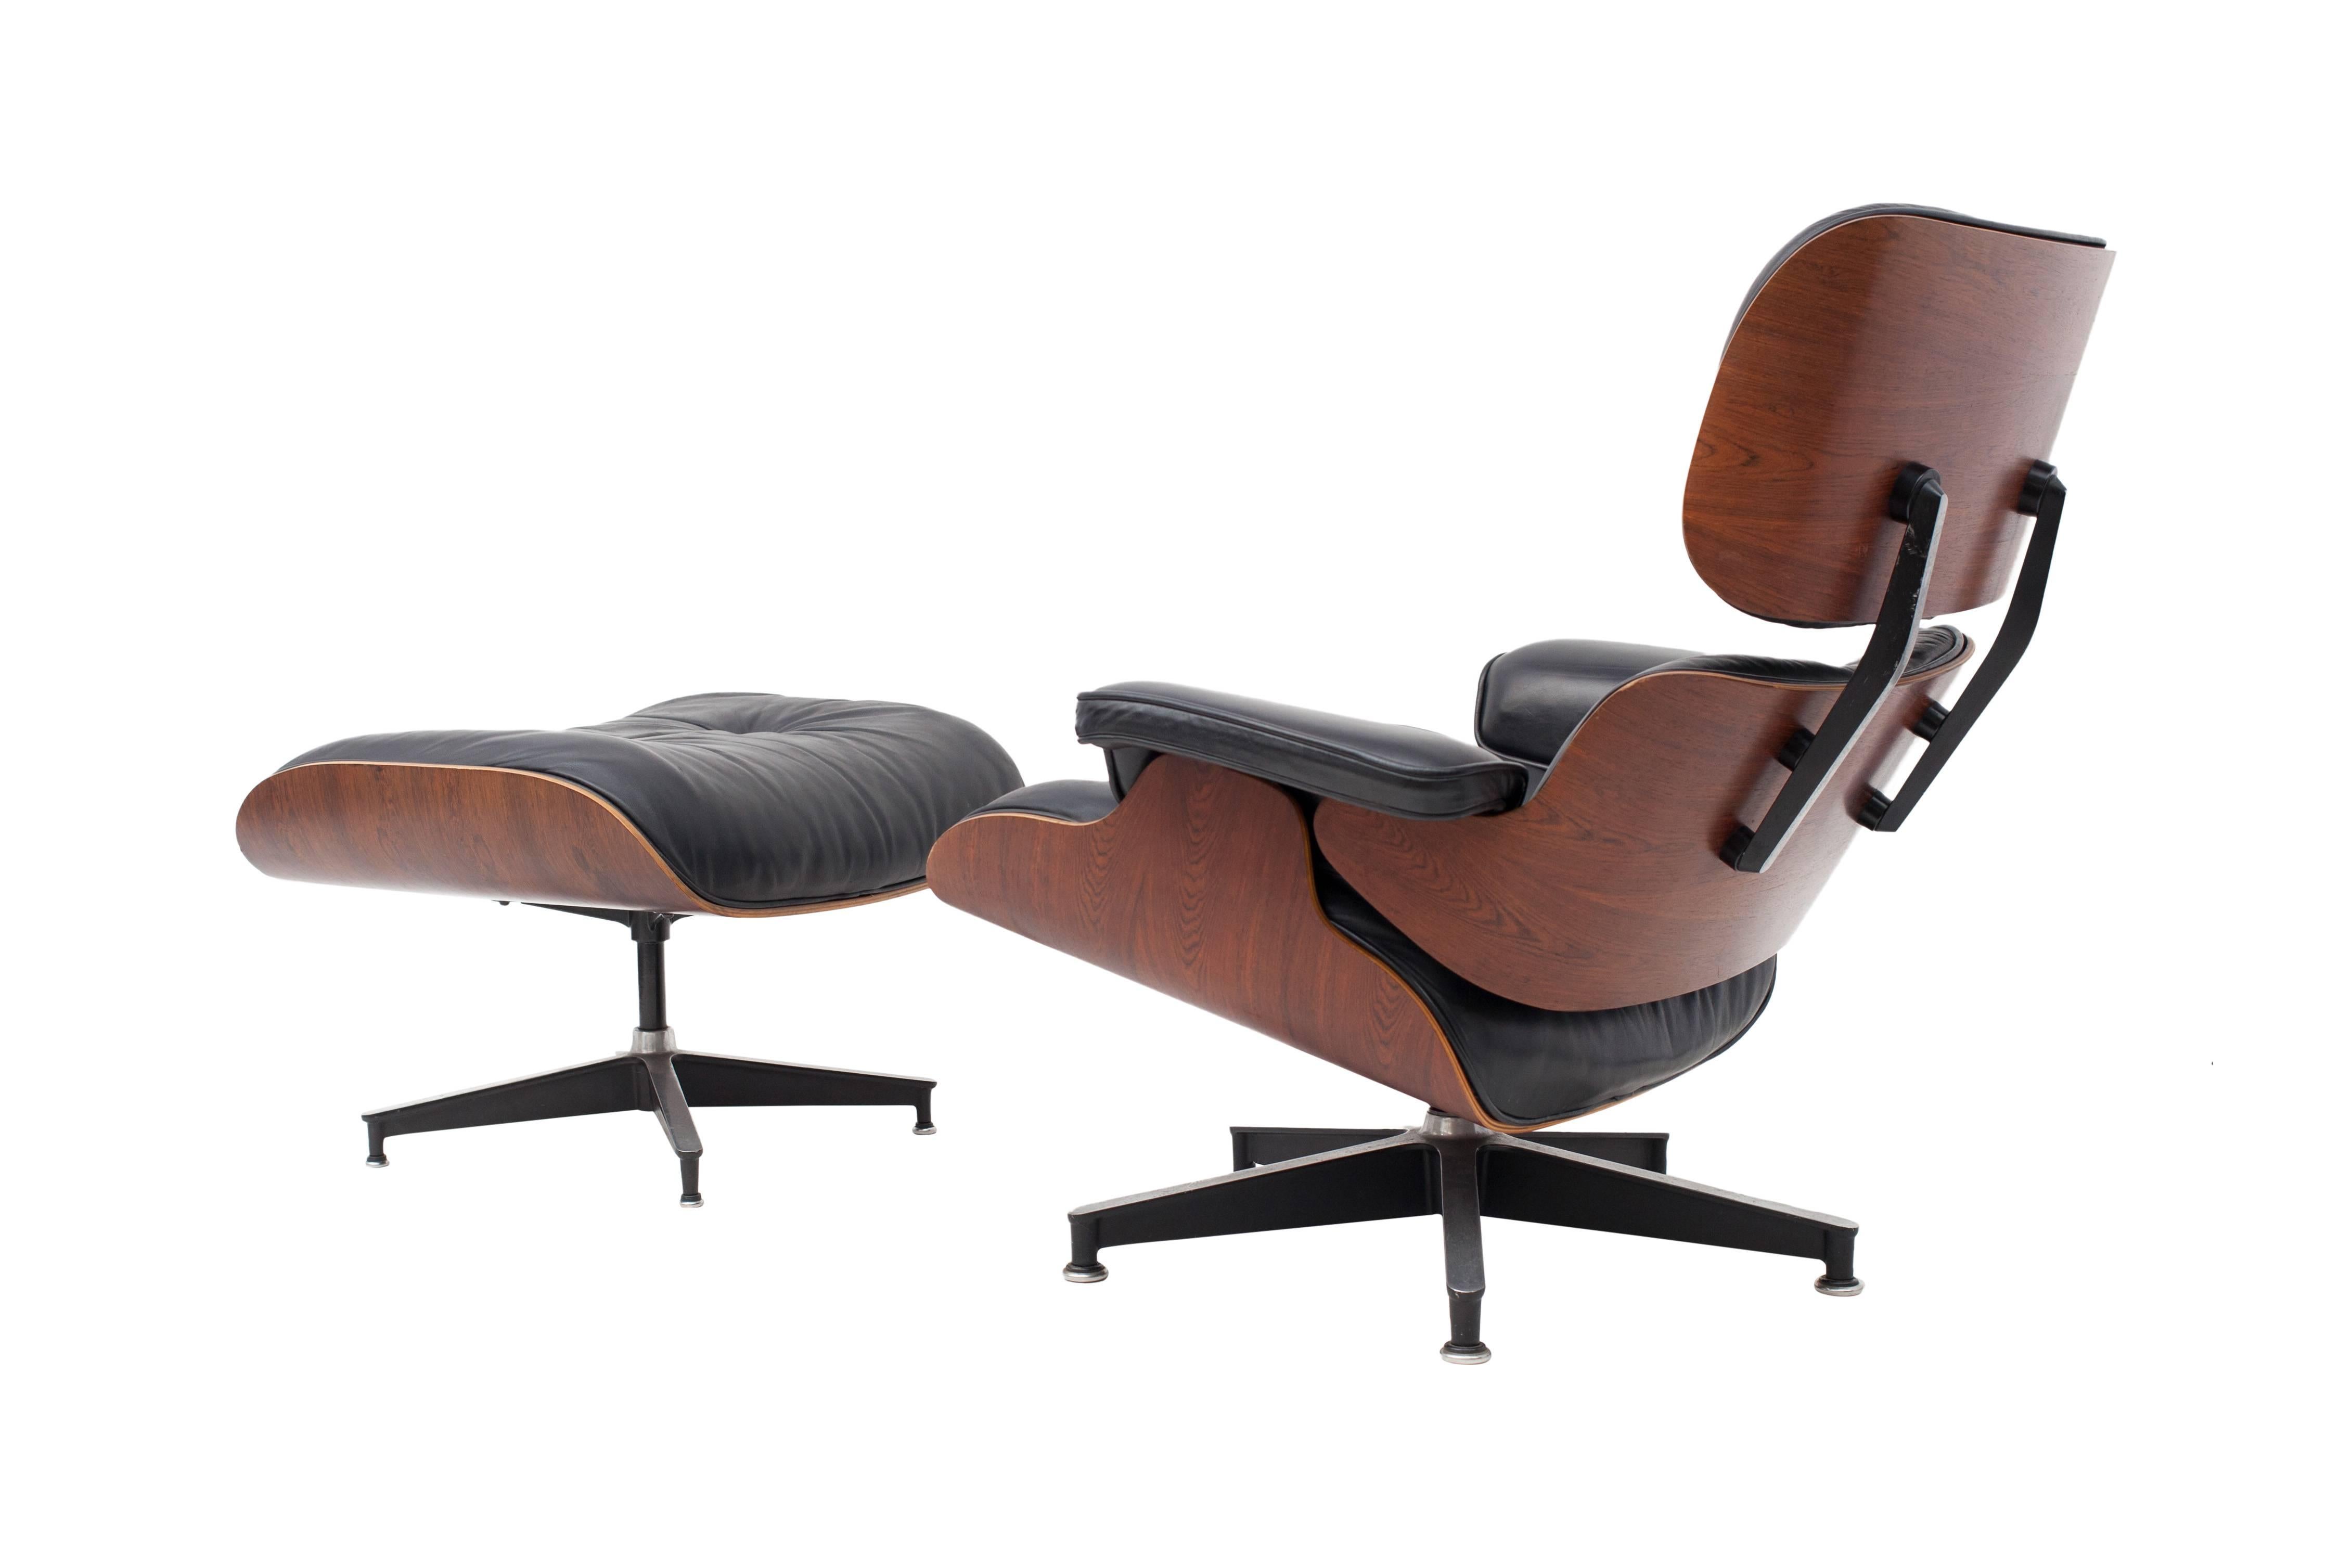 Eames black leather and Rio rosewood lounge chair and ottoman.
Herman Miller USA production from April 27th 1978.

This set is in an amazing condition for it's age, no damage whatsoever, a real collector's piece.


Measures: H 86 cm, W 86 cm,